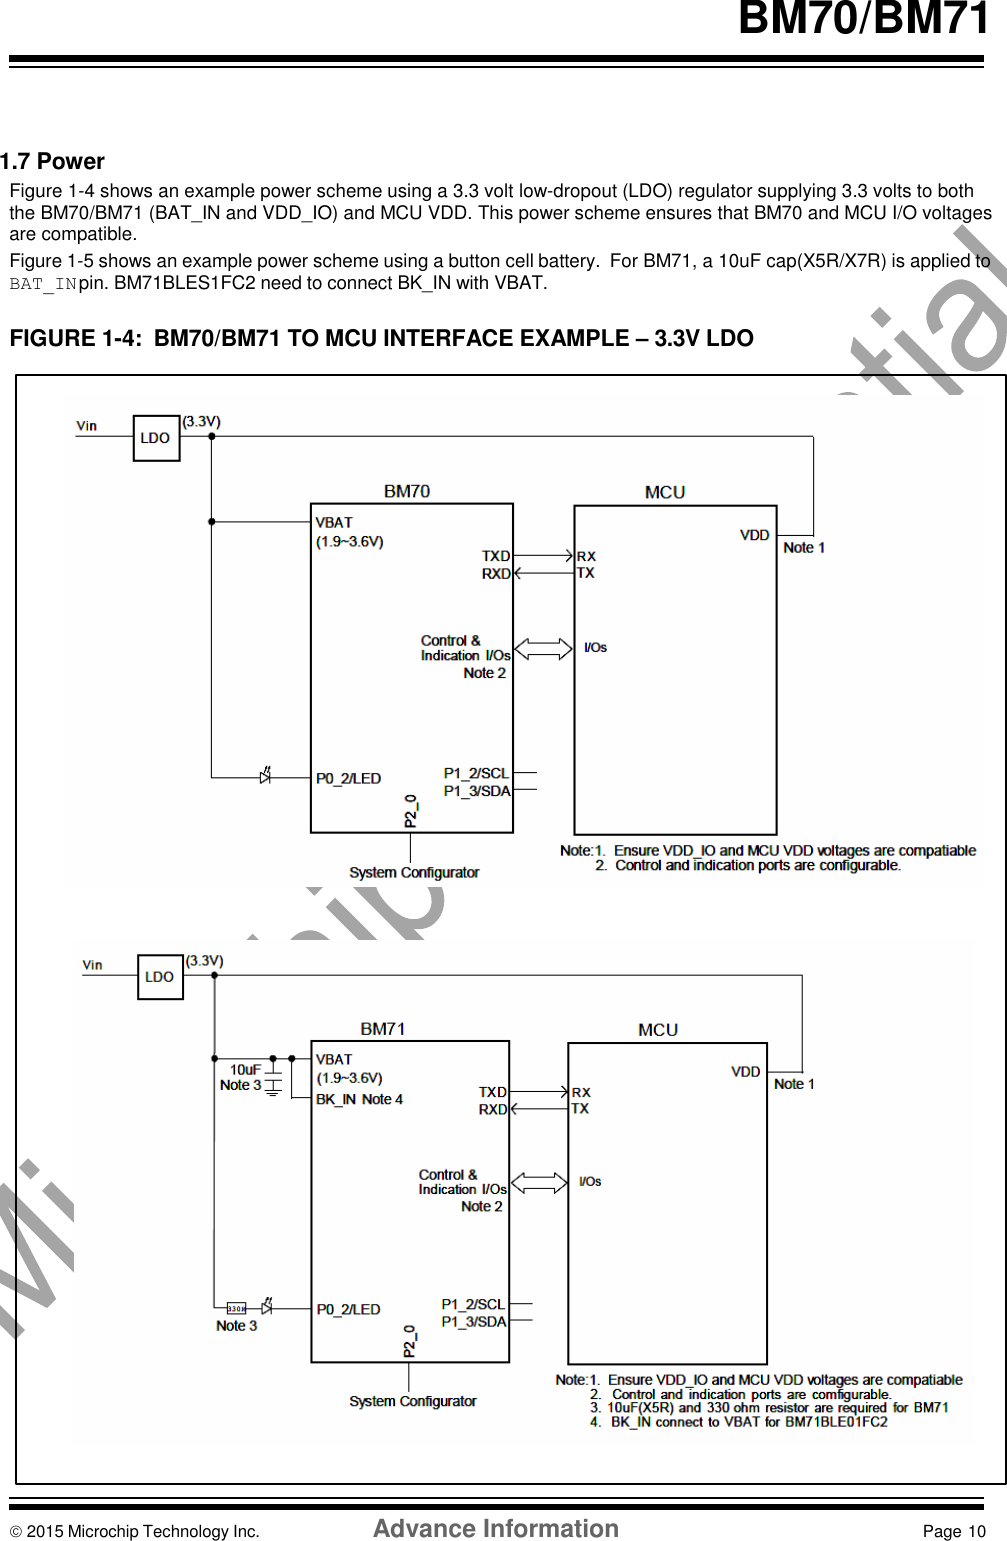    BM70/BM71    1.7 Power Figure 1-4 shows an example power scheme using a 3.3 volt low-dropout (LDO) regulator supplying 3.3 volts to both the BM70/BM71 (BAT_IN and VDD_IO) and MCU VDD. This power scheme ensures that BM70 and MCU I/O voltages are compatible. Figure 1-5 shows an example power scheme using a button cell battery.  For BM71, a 10uF cap(X5R/X7R) is applied to BAT_IN pin. BM71BLES1FC2 need to connect BK_IN with VBAT.  FIGURE 1-4:  BM70/BM71 TO MCU INTERFACE EXAMPLE – 3.3V LDO                                       2015 Microchip Technology Inc.  Advance Information  Page 10